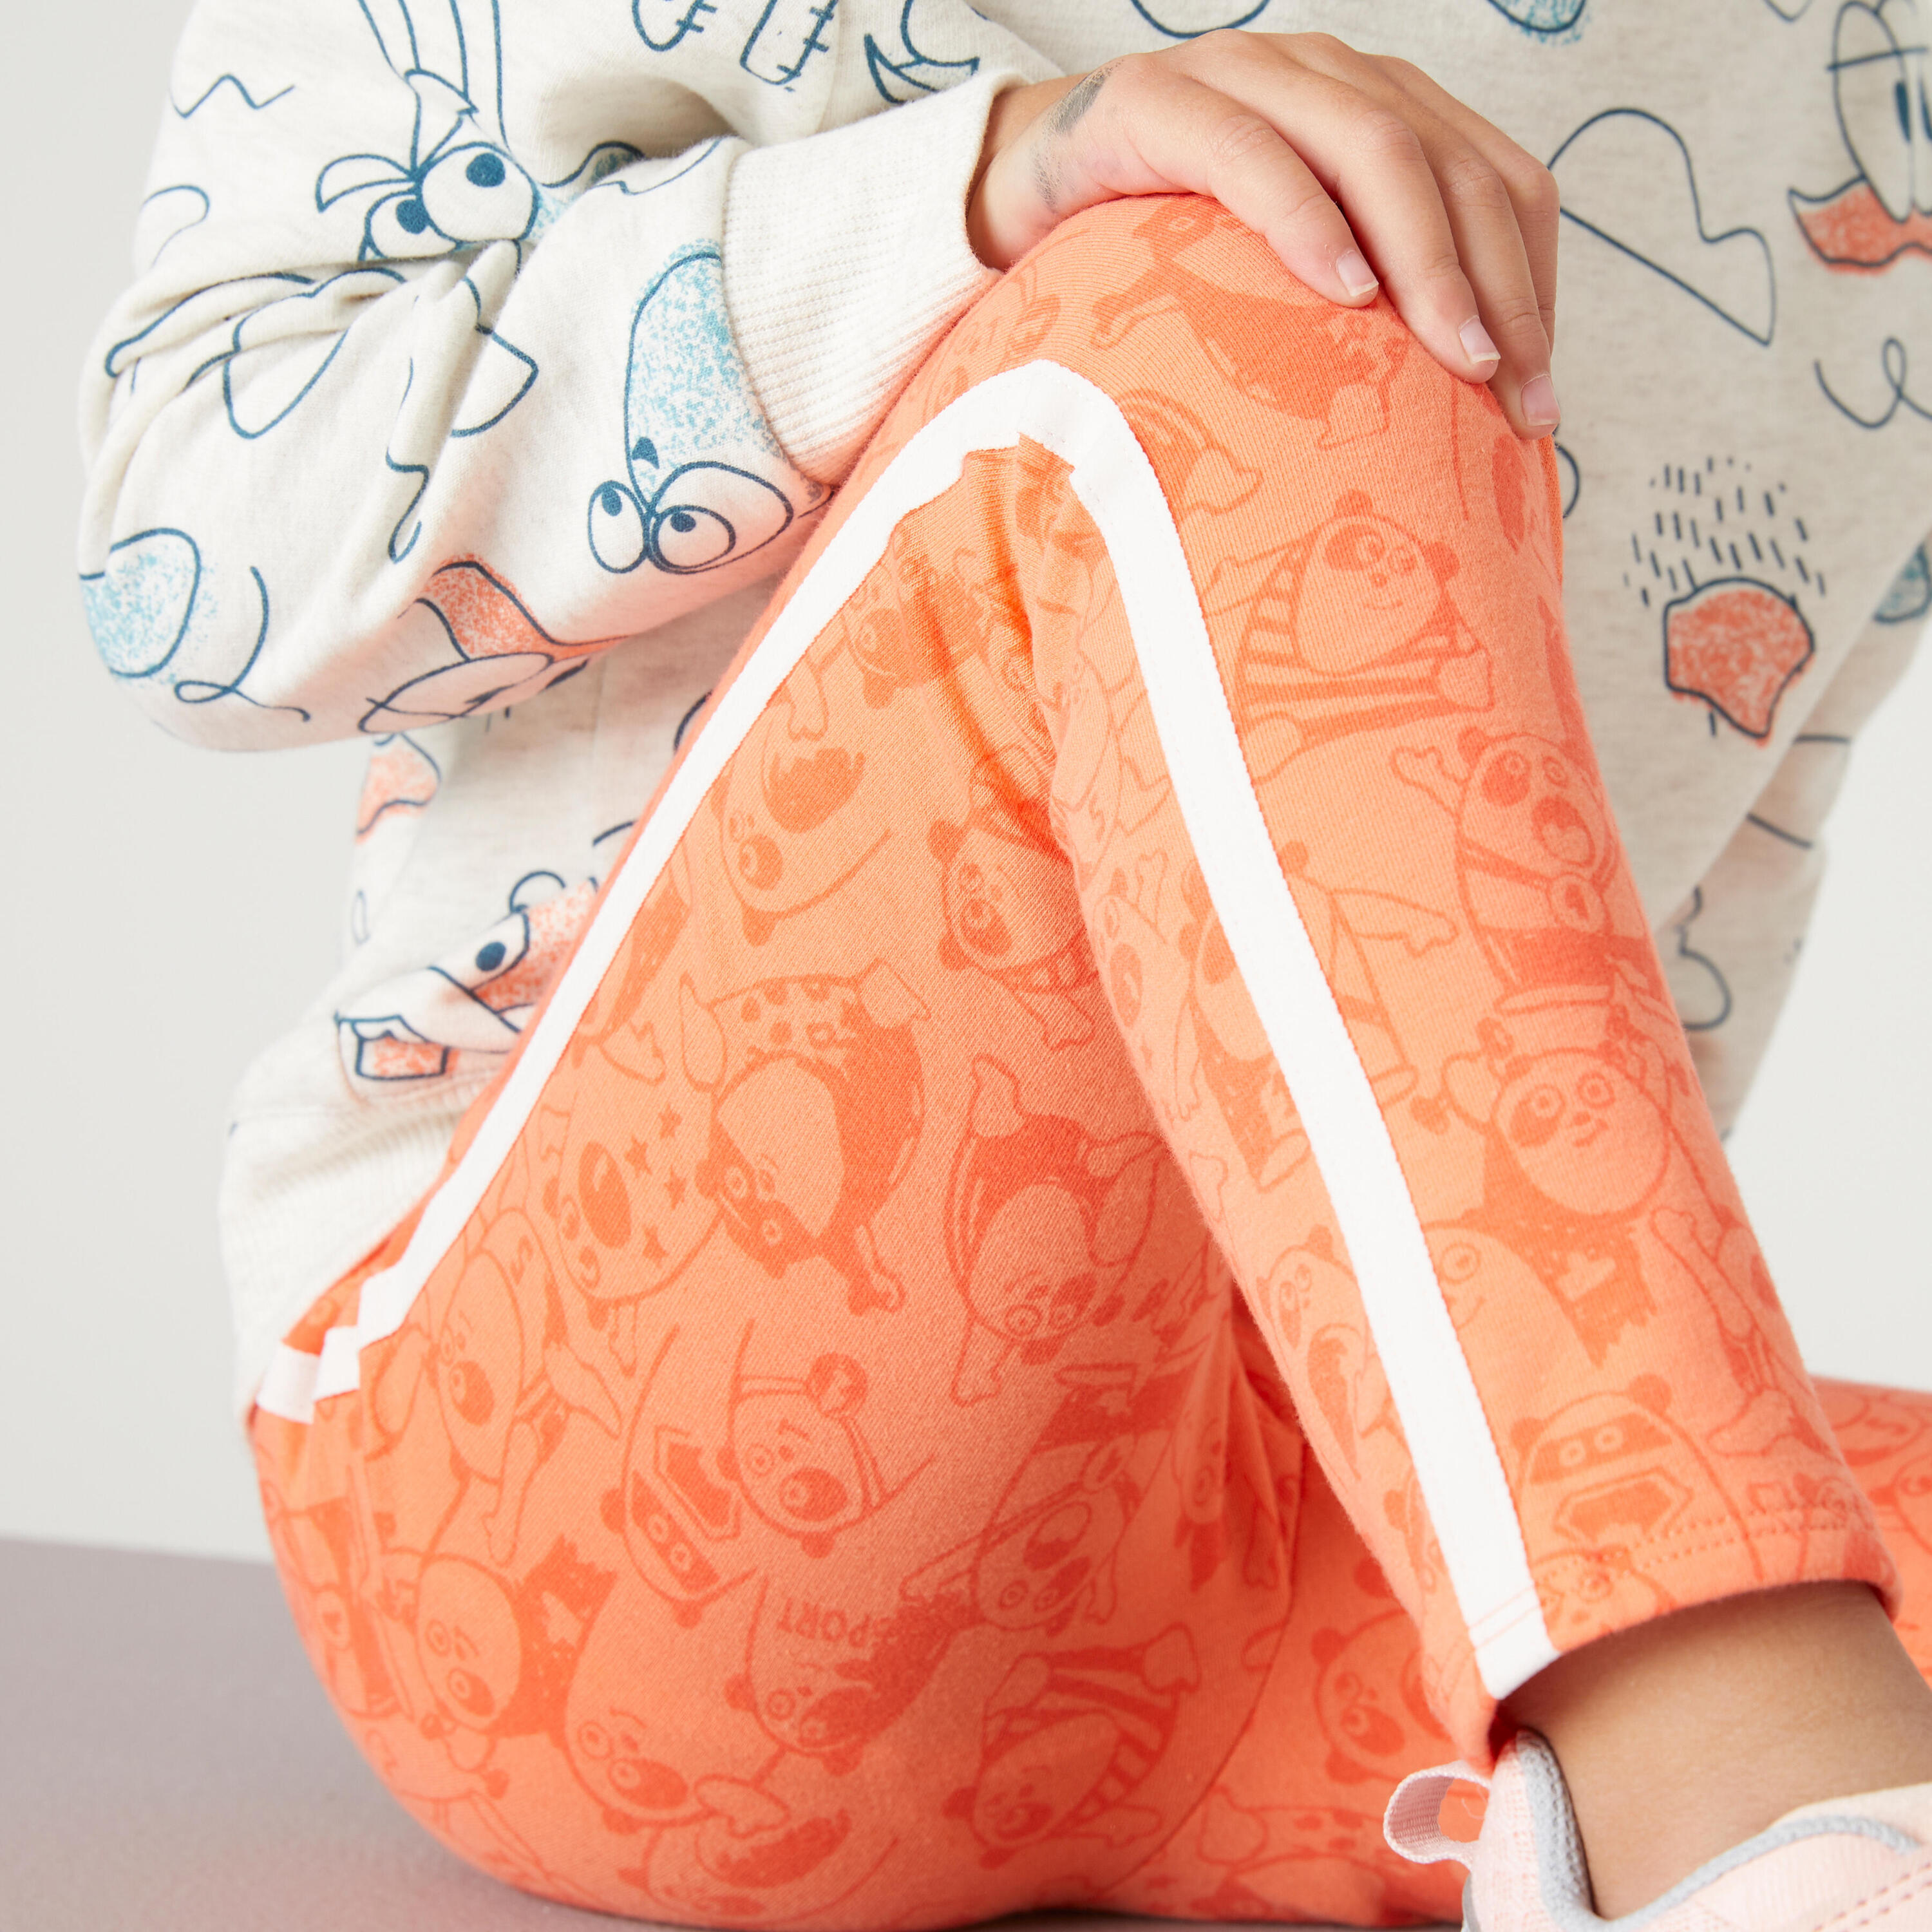 Kids' Warm Leggings 120 - Coral with Patterns 6/6